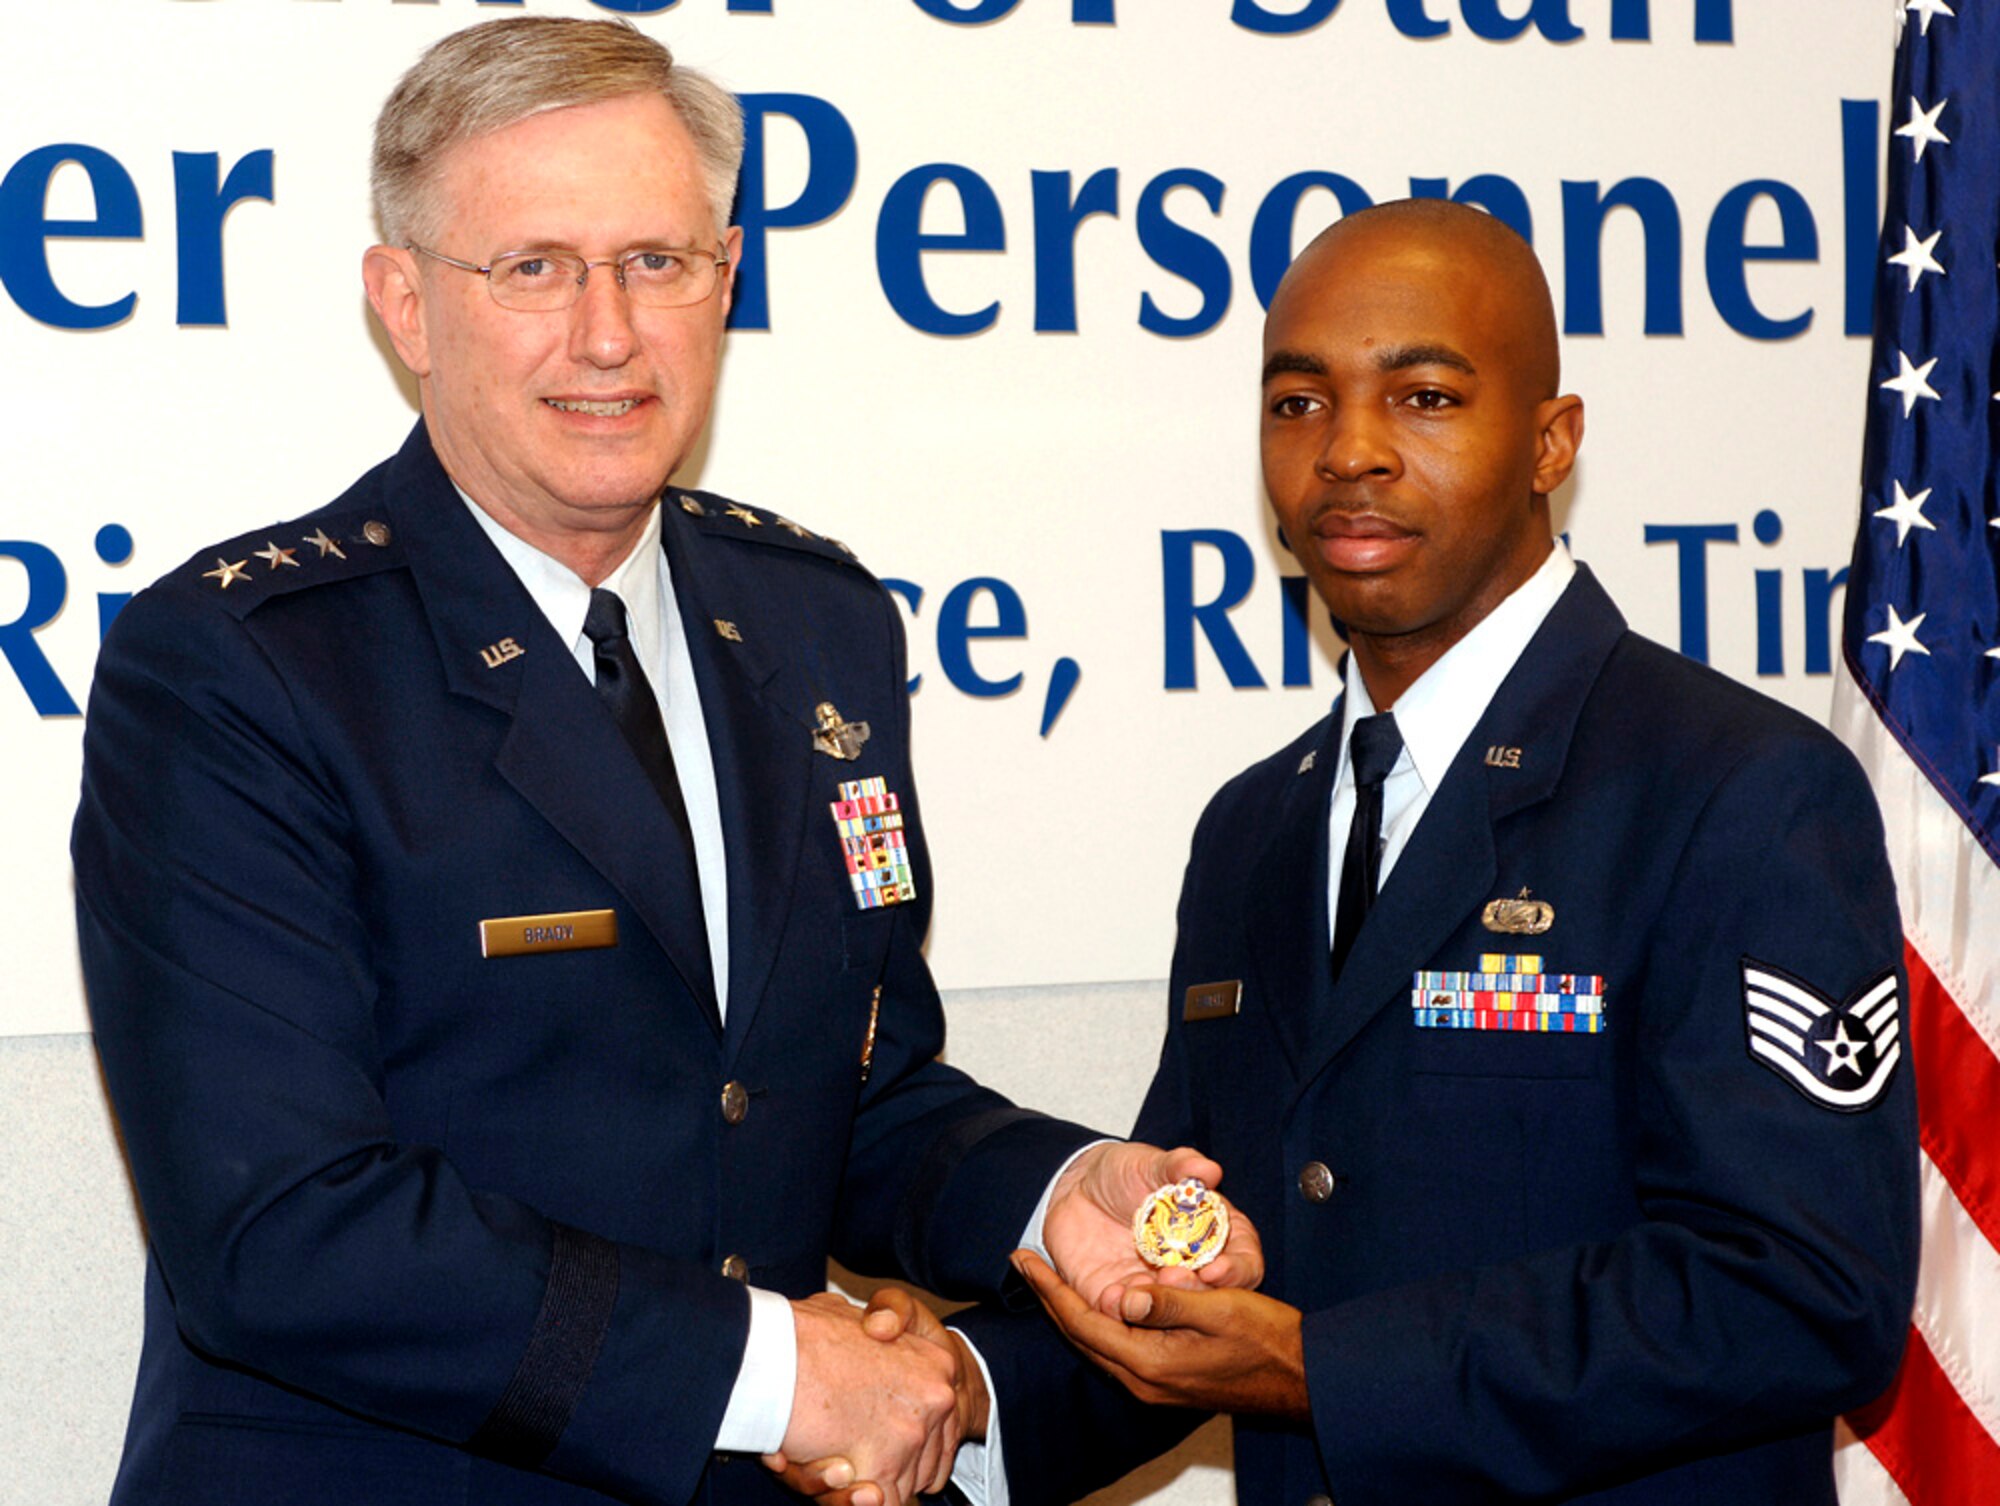 Lt. Gen. Roger Brady, deputy chief of staff for manpower and personnel, presents the new Headquarters Air Force badge to Staff Sgt. Chris Kennerly during a ceremony marking the official release of the badge on Friday, May 19, 2006, in the Pentagon.  Airmen assigned to the Pentagon will have the option to wear the new badge.  The basis for the badge is Air Force heritage and the design incorporates many elements from the Department of the Air Force Seal.  Air Force Chief of Staff Gen. T. Michael Moseley approved the design and development of the badge in September.  (U.S. Air Force photo/Tech. Sgt. Scott M. Ash)